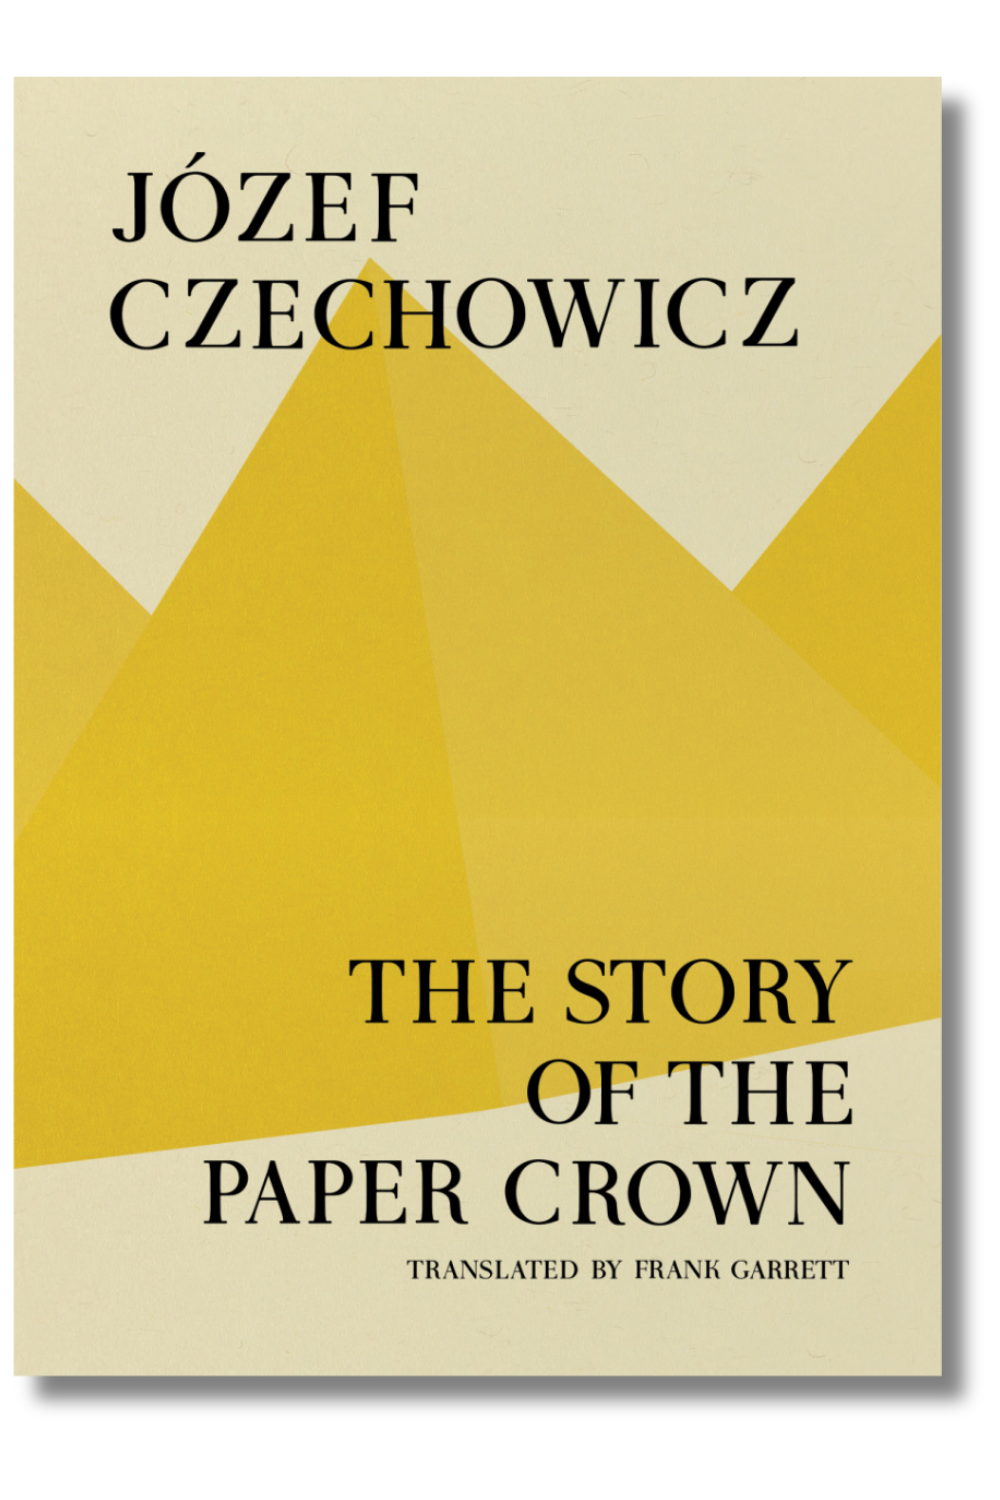 The cover of "The Story of the Paper Crown" by Jozef Czechowicz